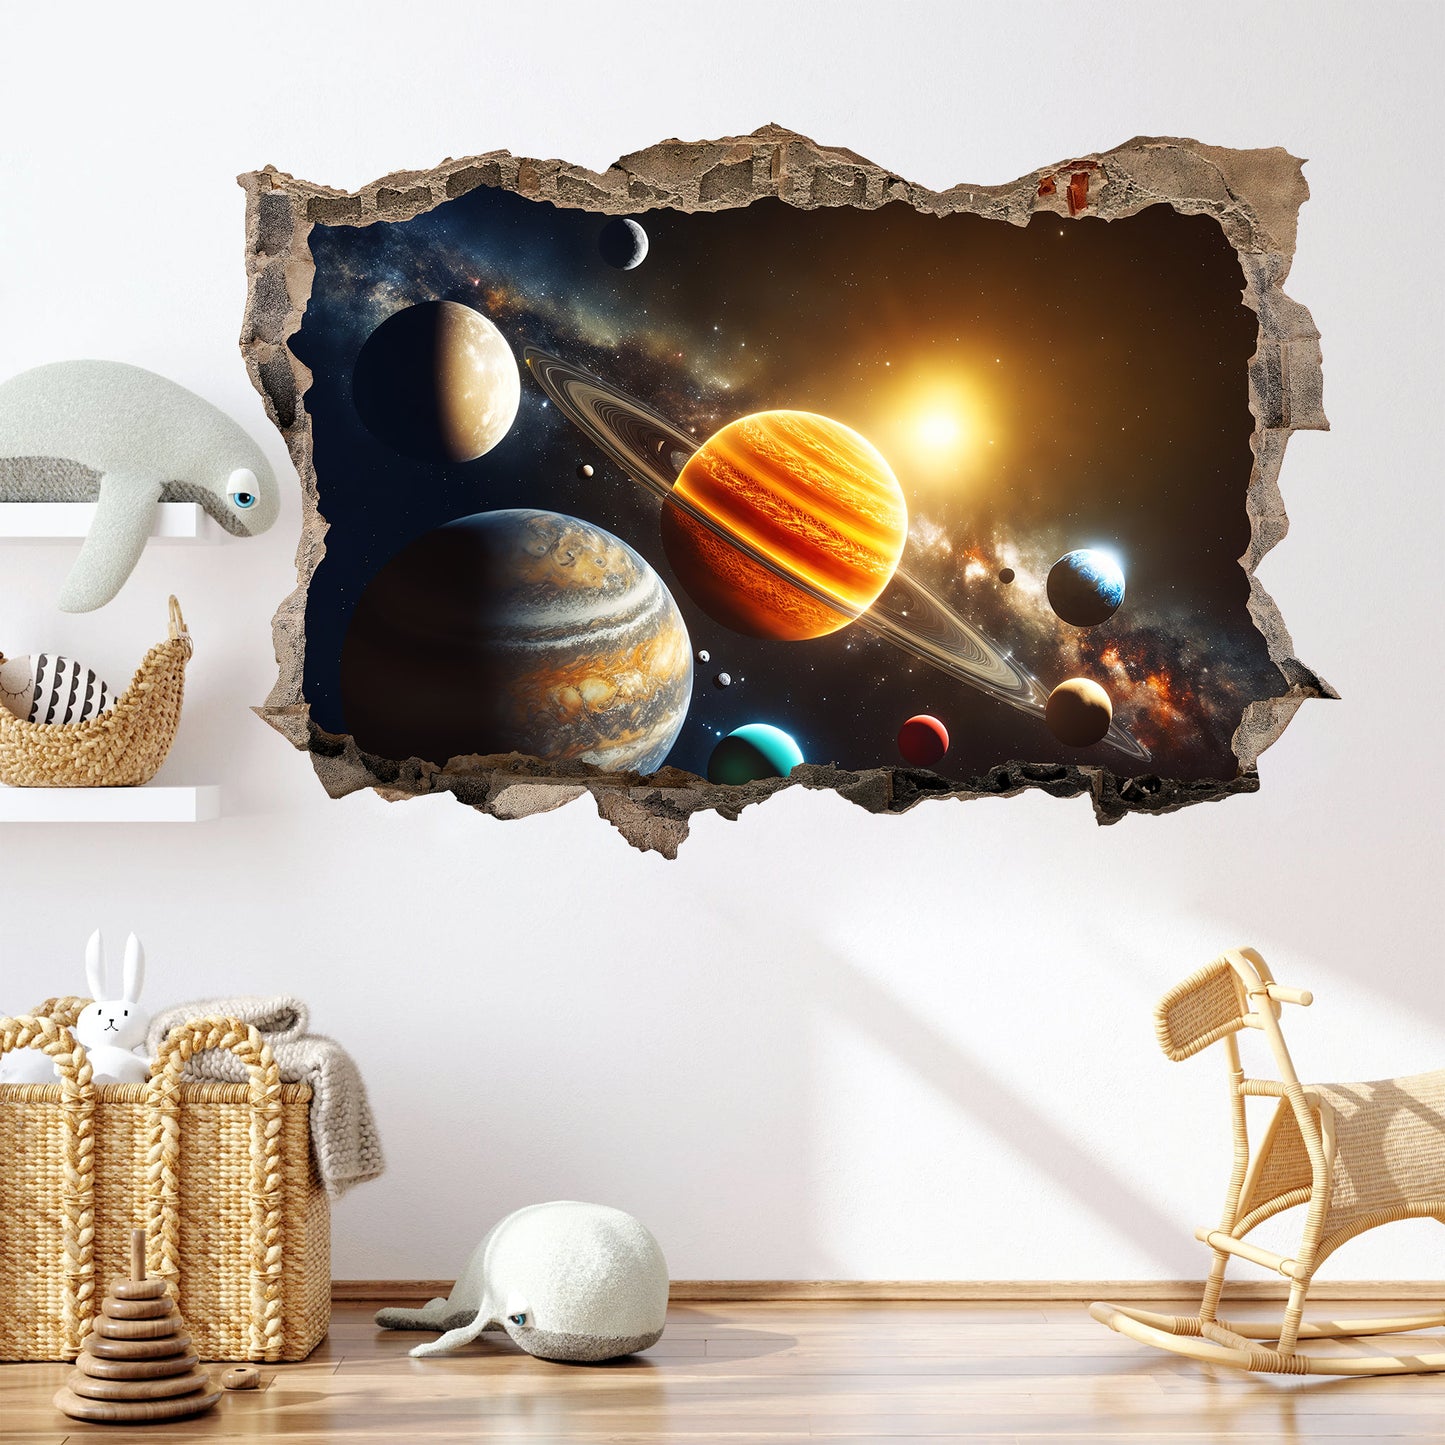 Space Odyssey: Solar System Planets Breakthrough 3D Broken Wall Decal - Removable Peel and Stick - BW001